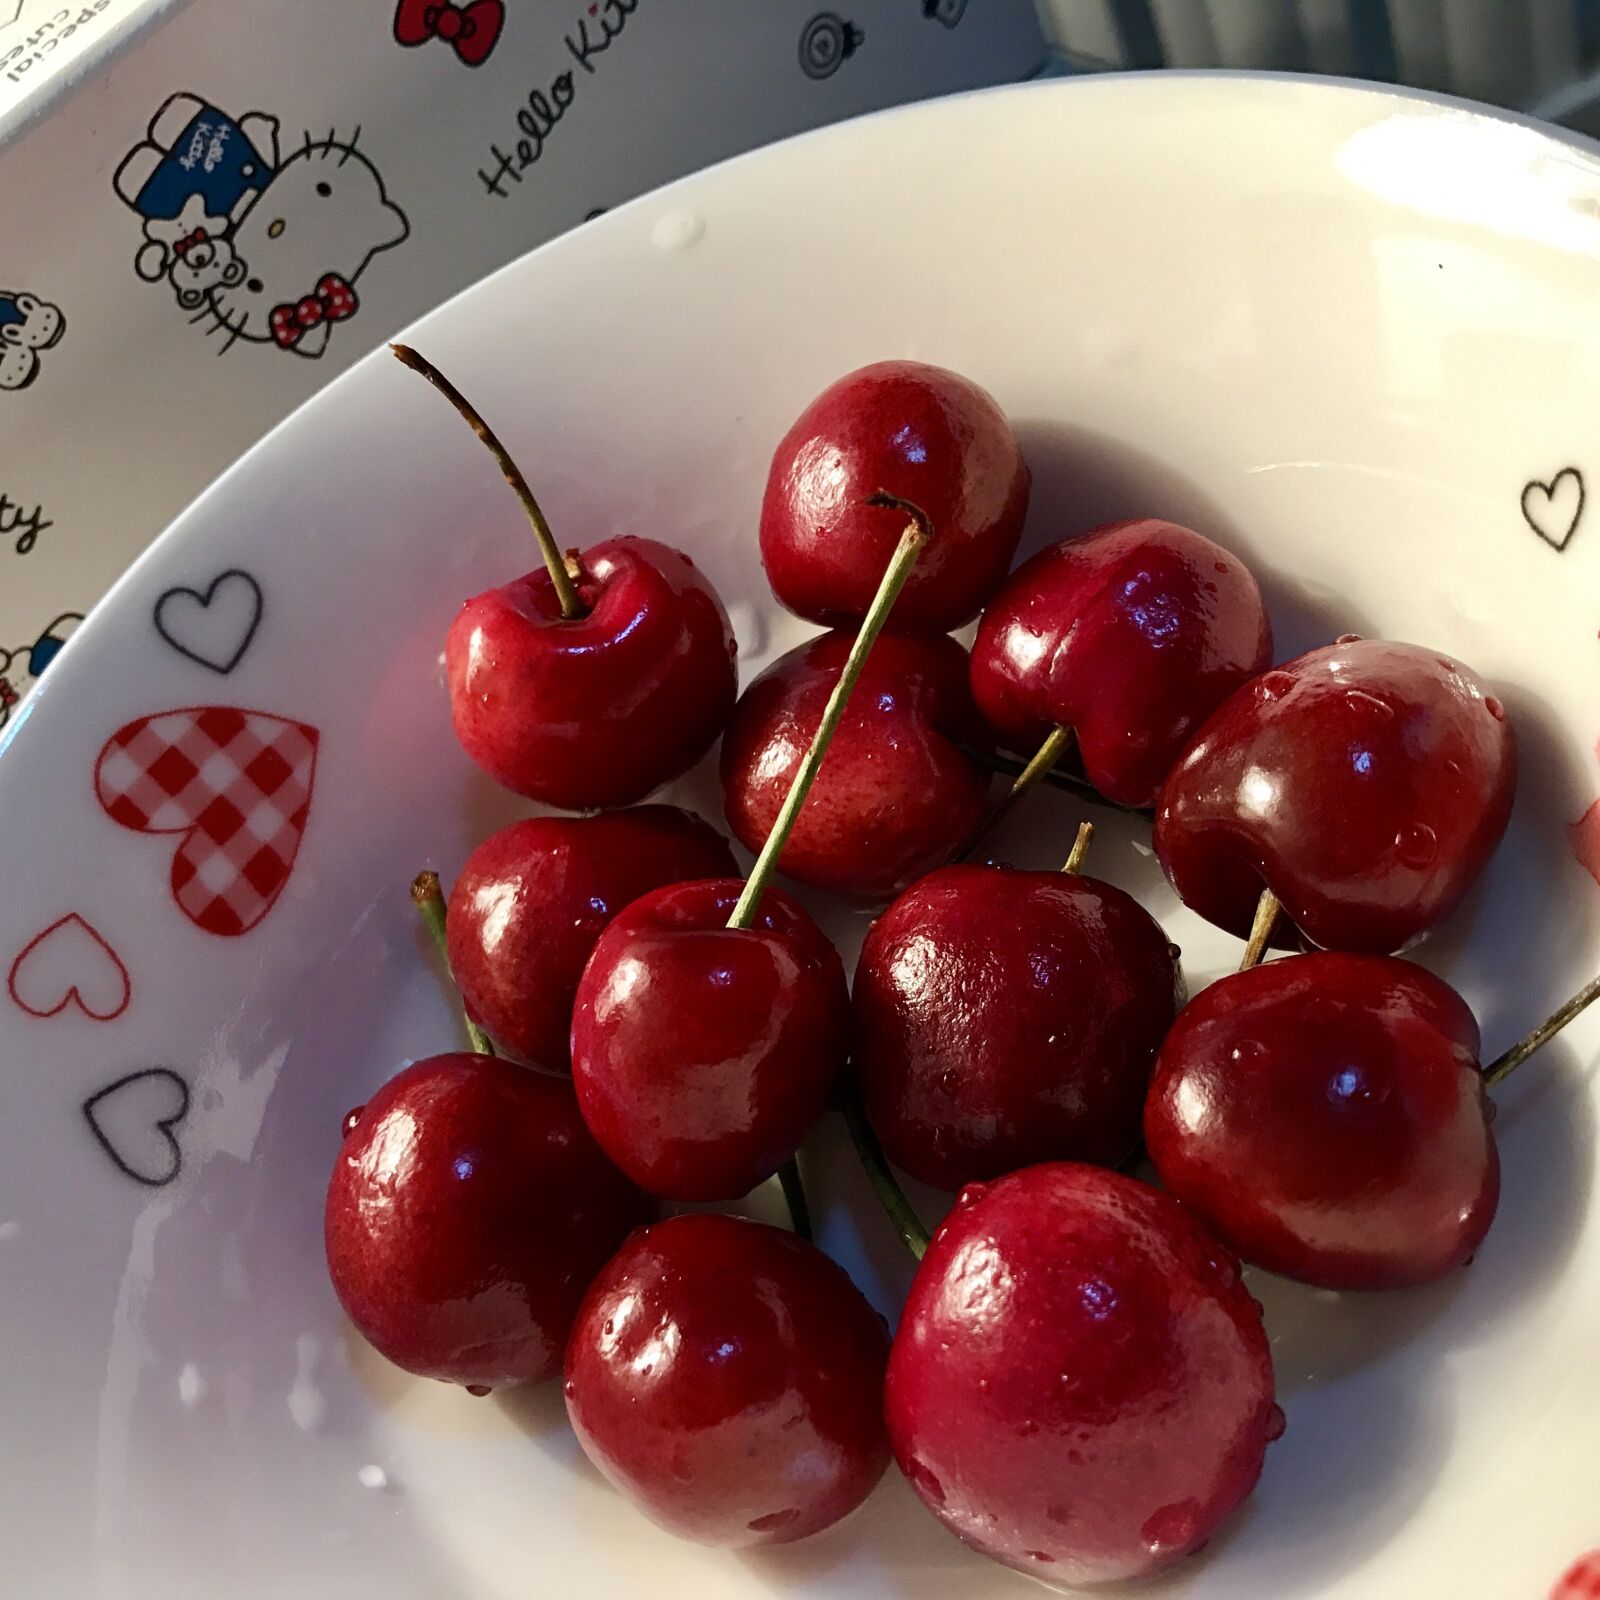 iPhone 7 Plus back iSight Duo camera 3.99mm f/1.8 sample photo. Cherry, love, fruit photography